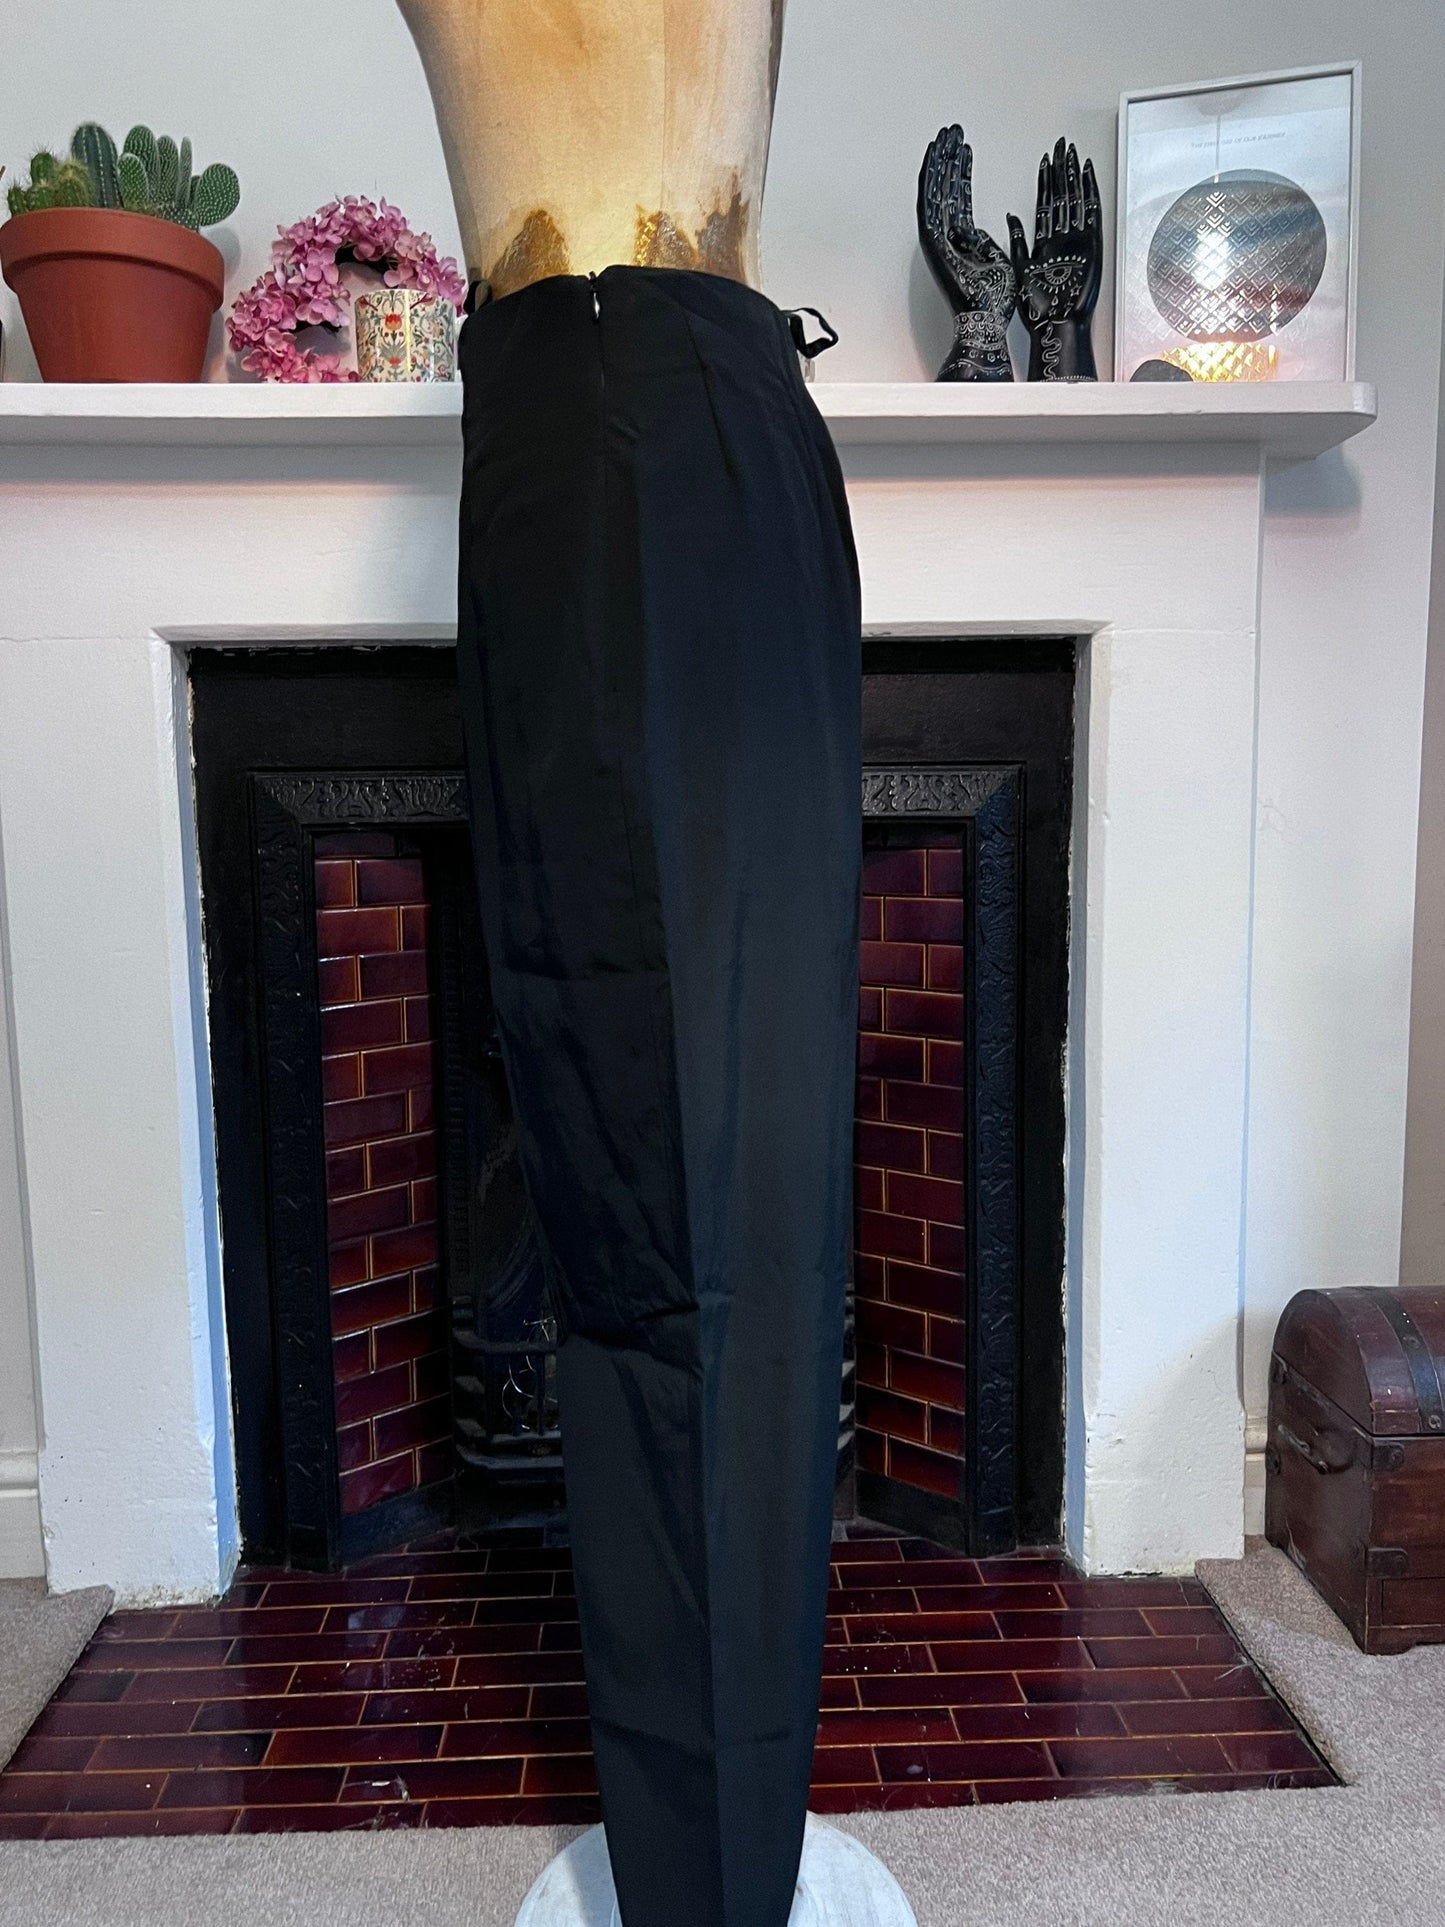 Vintage Black Pleated Trousers, 80s High Waist Trousers With Belt